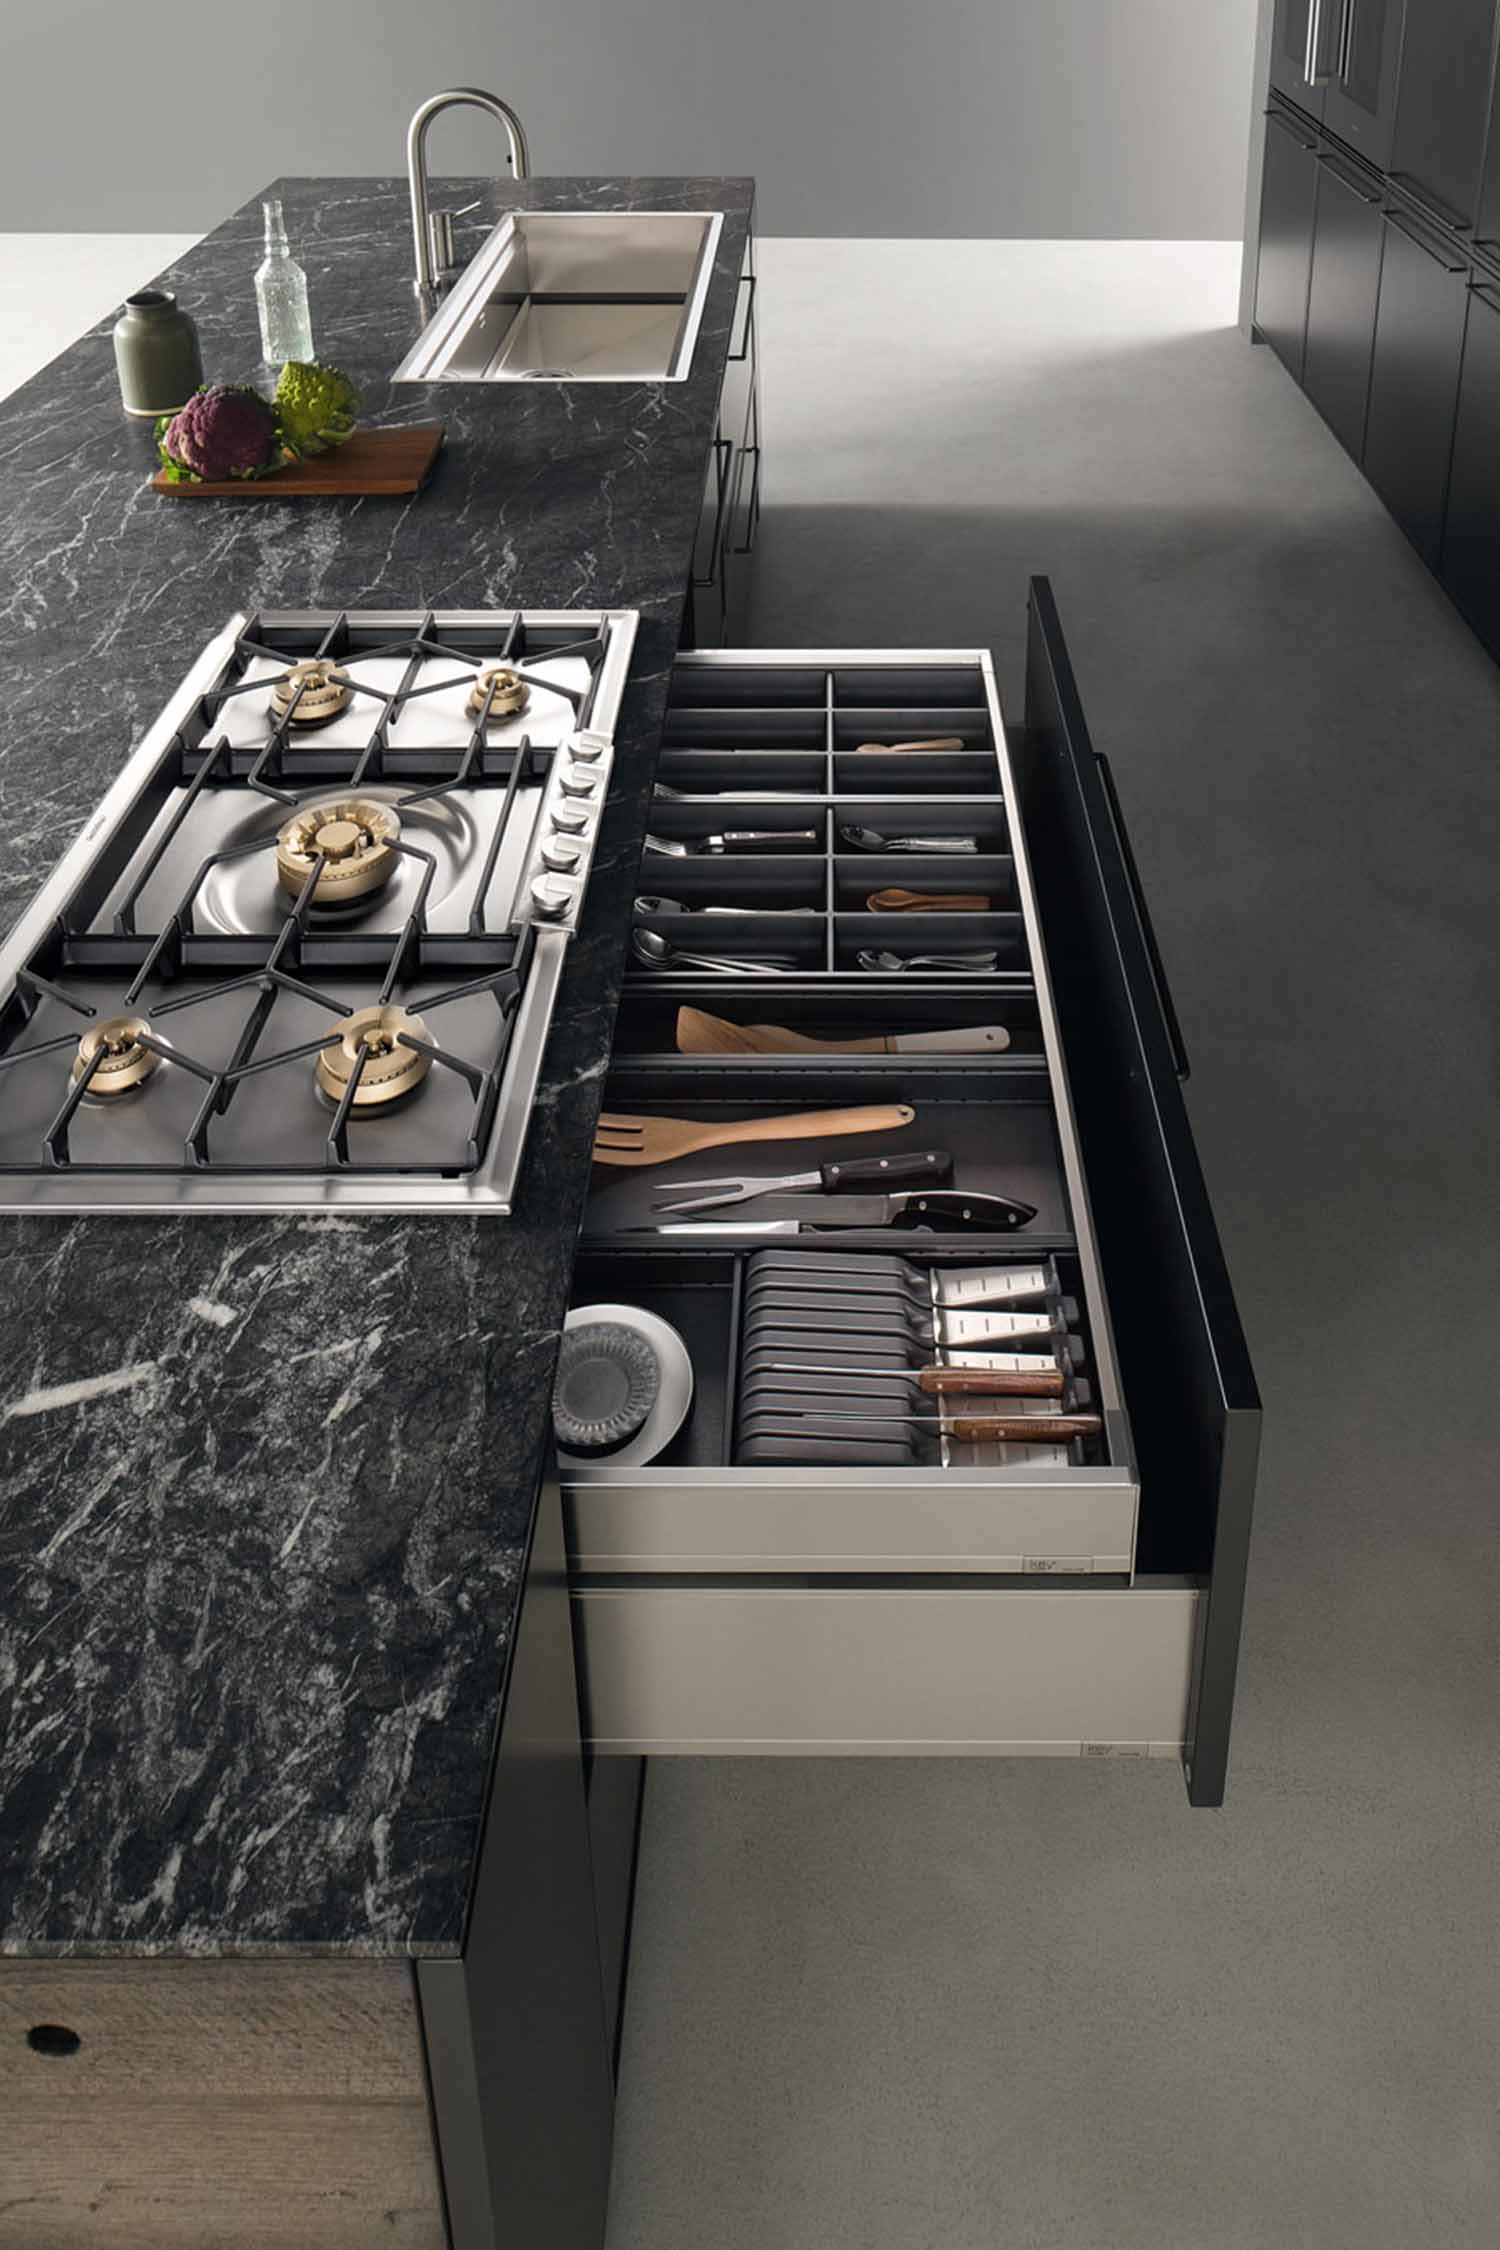 Multi-functional extra-wide deep drawers host dividers and organisers to contain all kitchen essentials close to the cooking area.